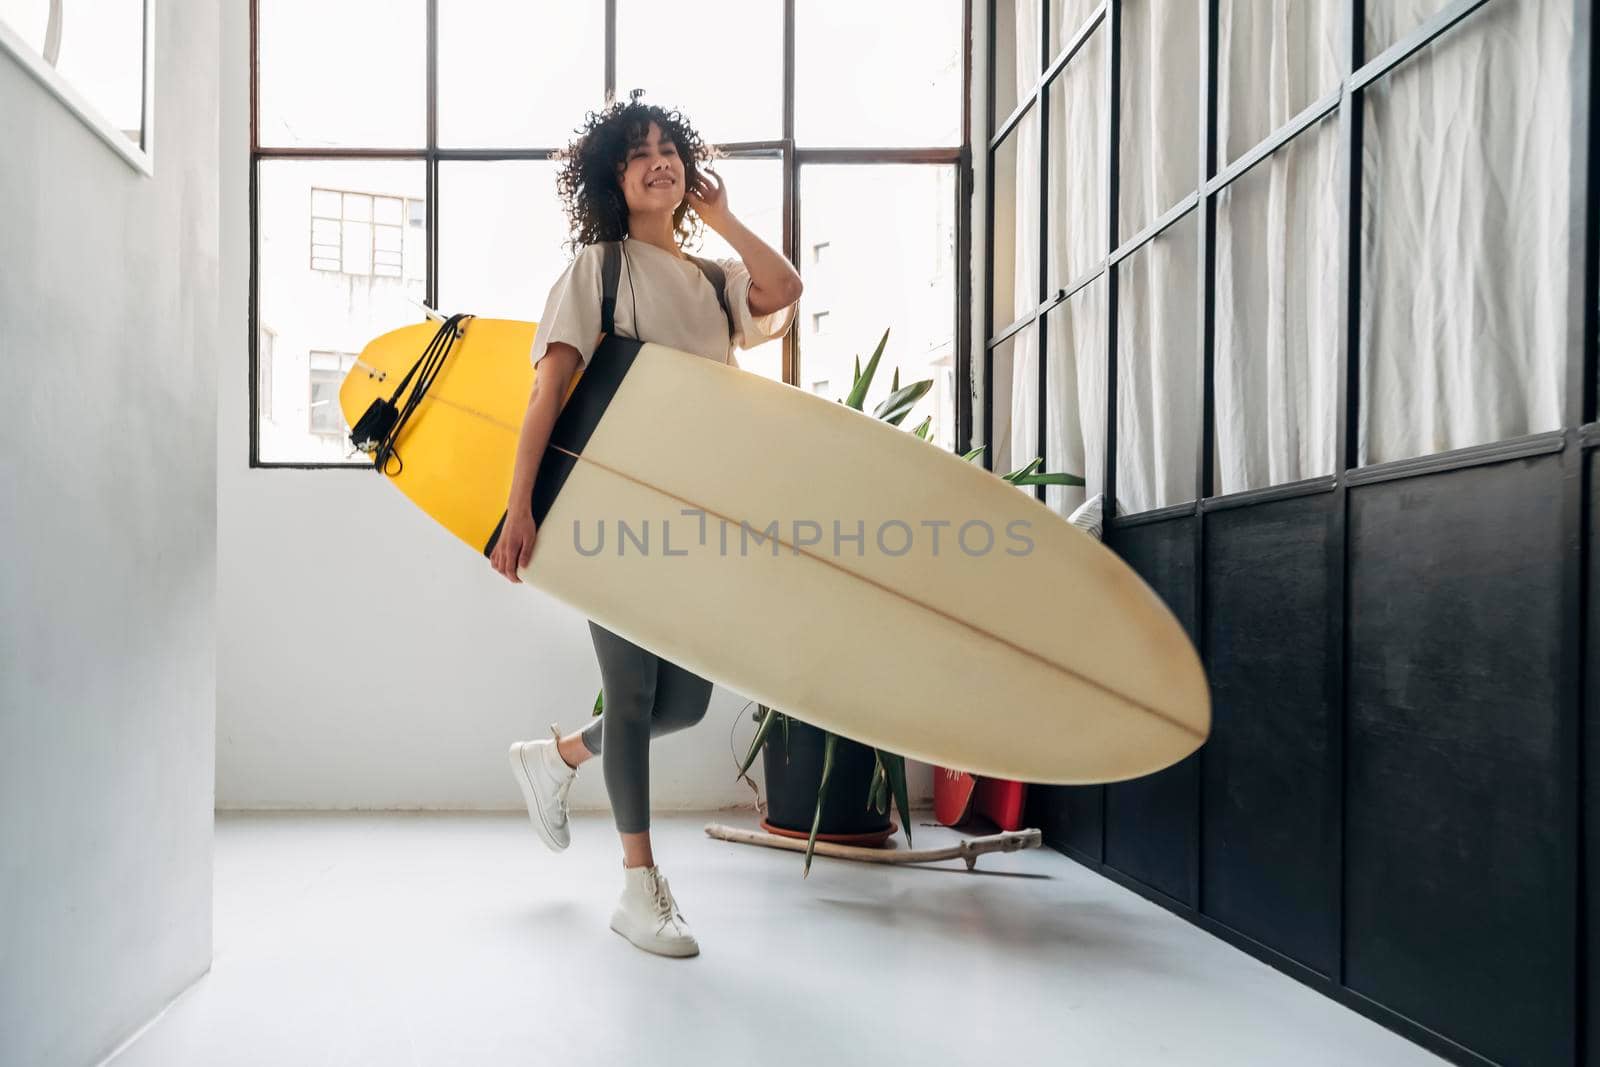 Smiling young mixed race woman arrives home listening to music and carrying a surf board after a day of surfing. Lifestyle concept.